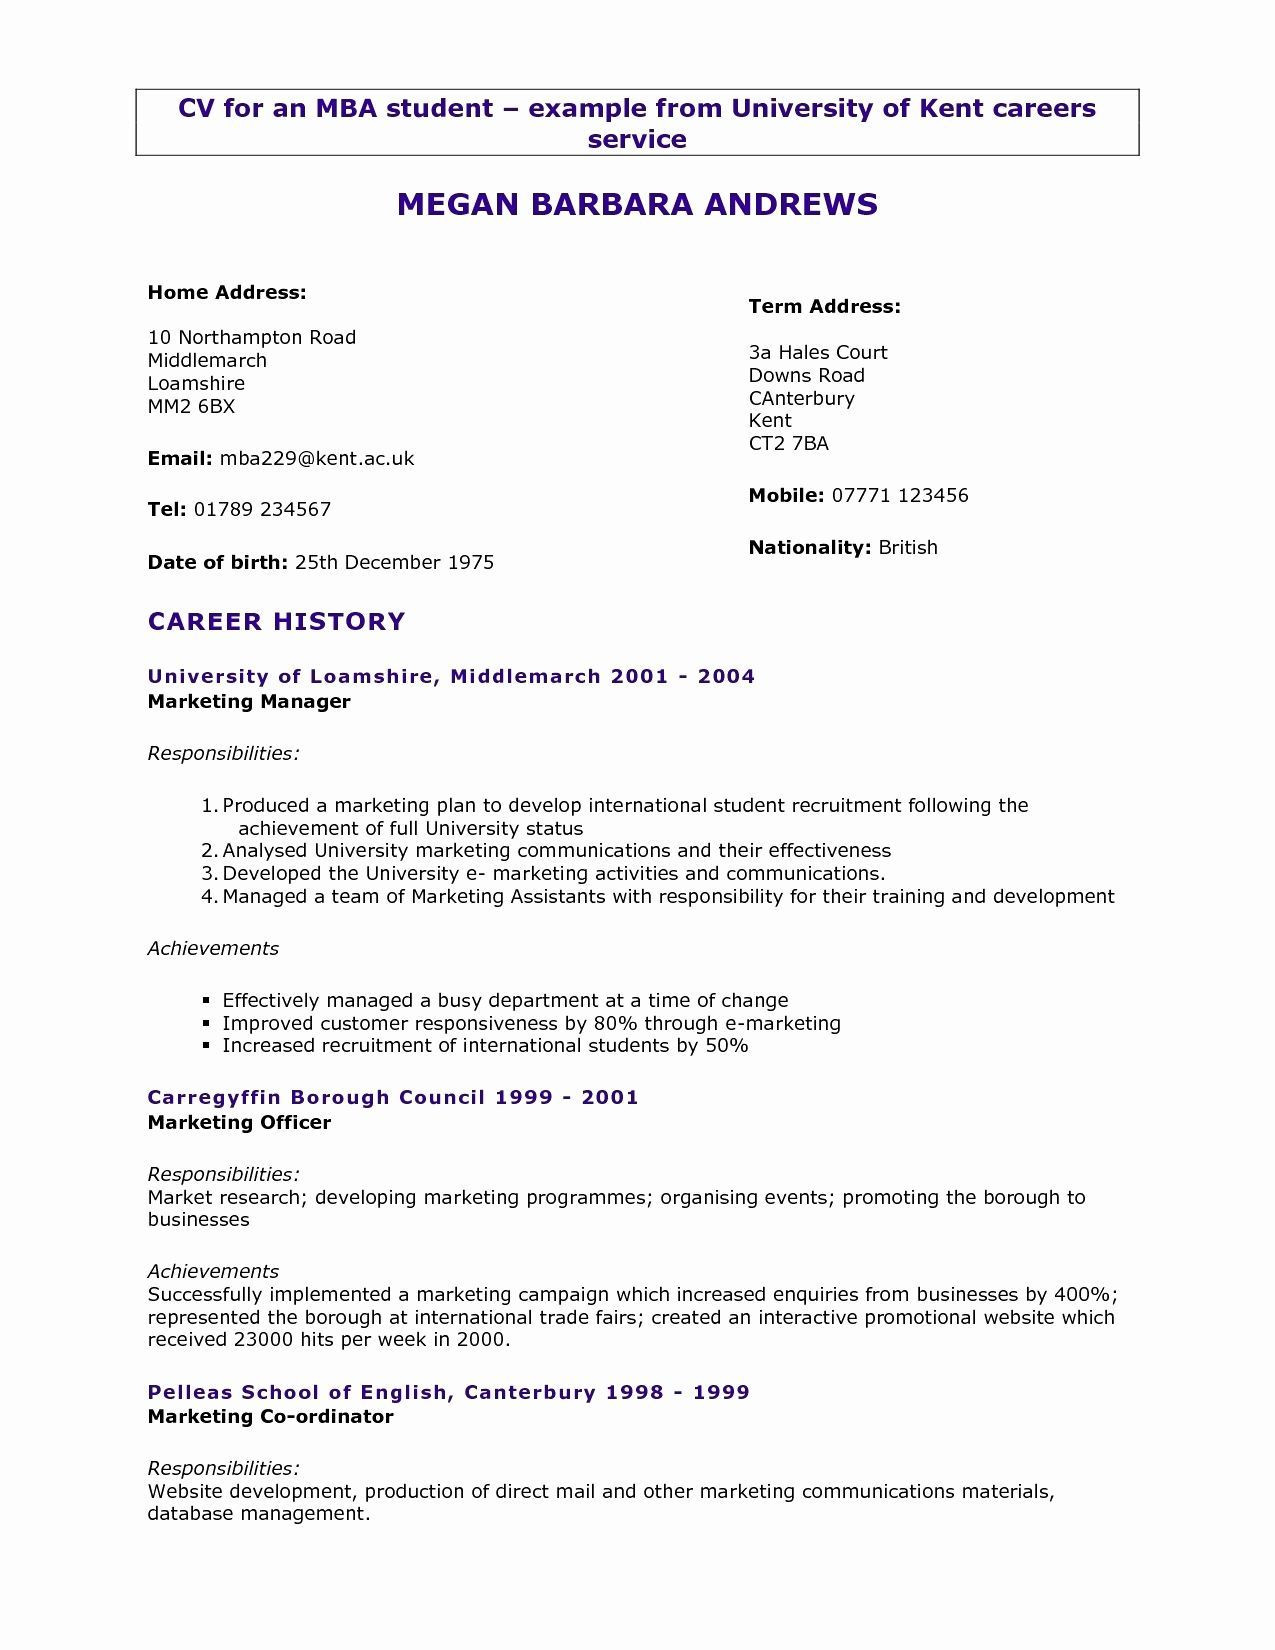 Resume Template for 3 Years Experience Resume format 3 Years Experience Marketing – Resume format …